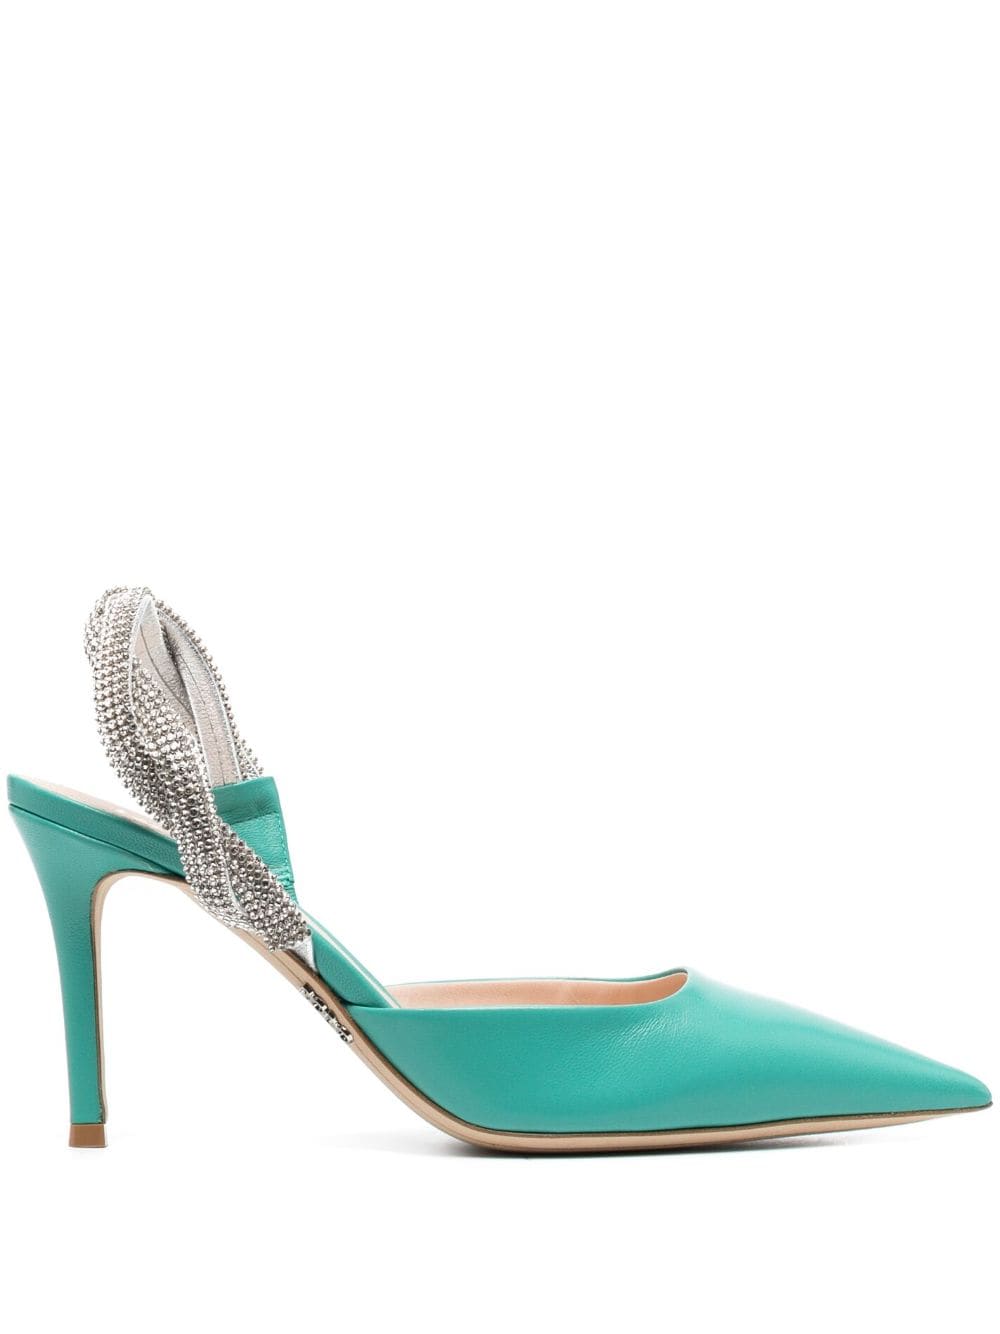 Rodo 95mm crystal-embellished leather pumps - Green von Rodo